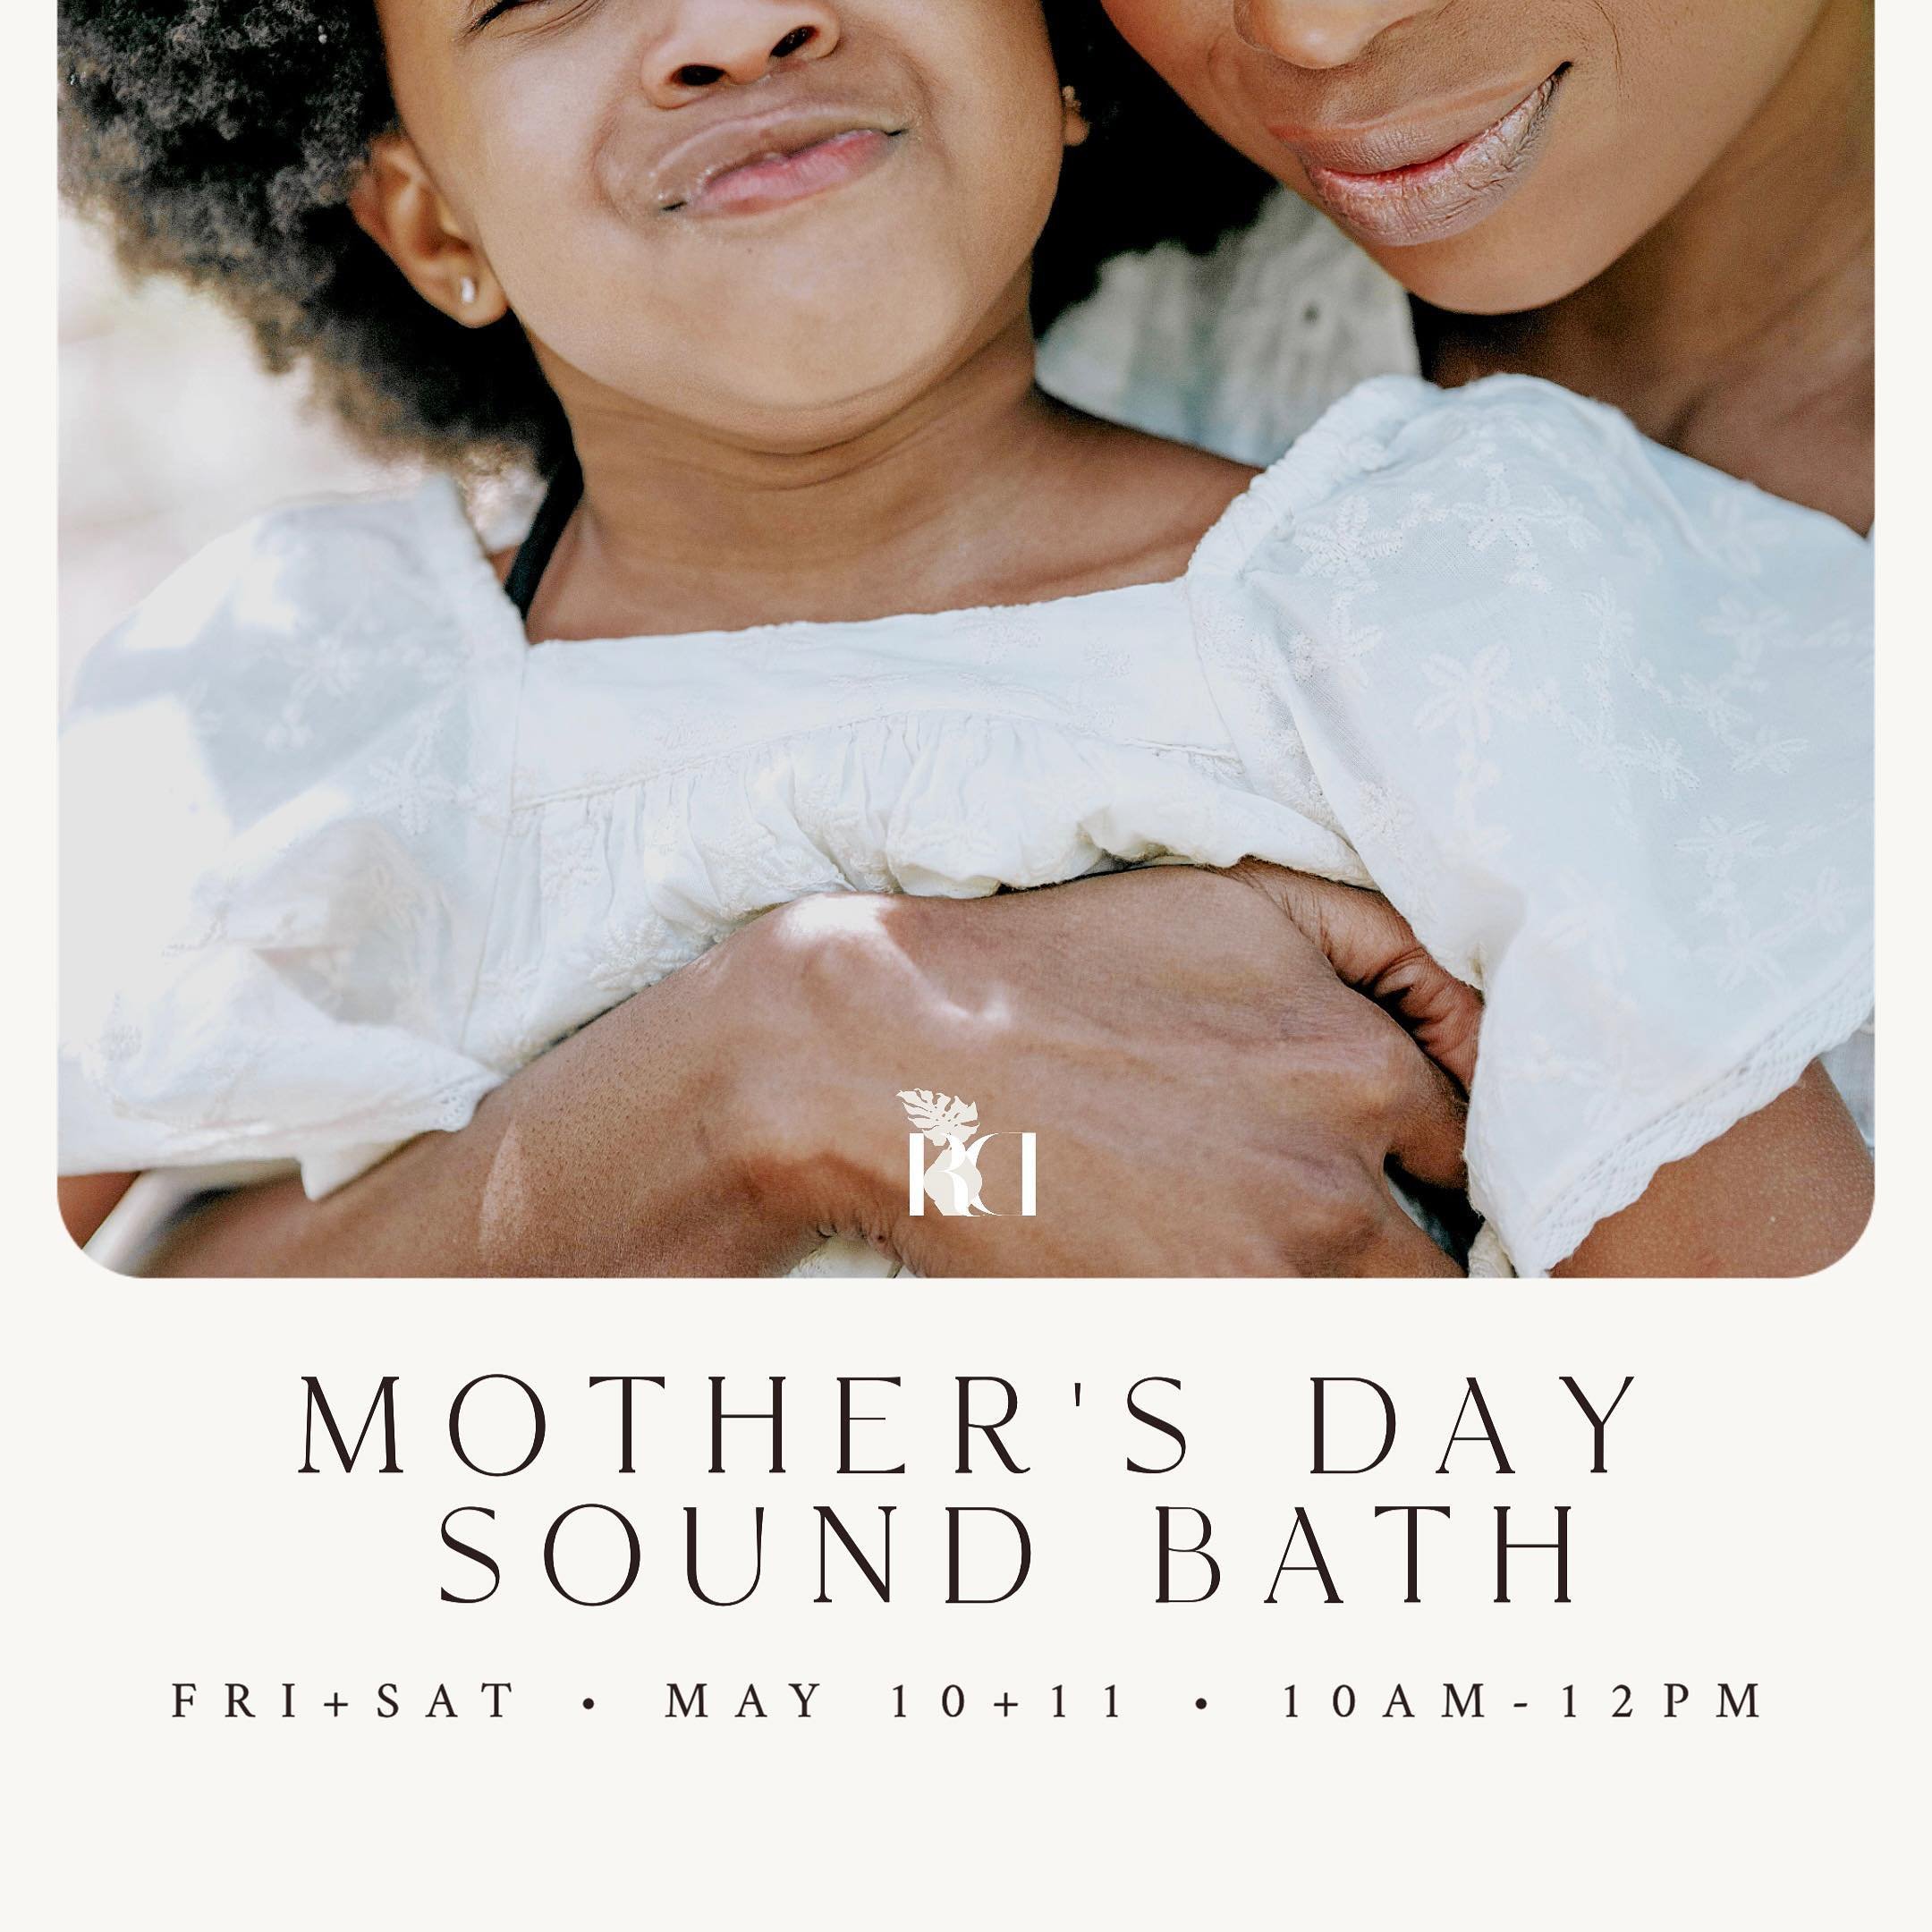 Mother&rsquo;s Day Sound Bath + Tea + Dessert

Friday, May 10th- SOLD OUT!
Saturday, May 11th- spots still available
10:00 AM - 12:00 PM
Los Feliz

We want to spend some time honoring our mothers and the mother figures in our lives. This is a wonderf